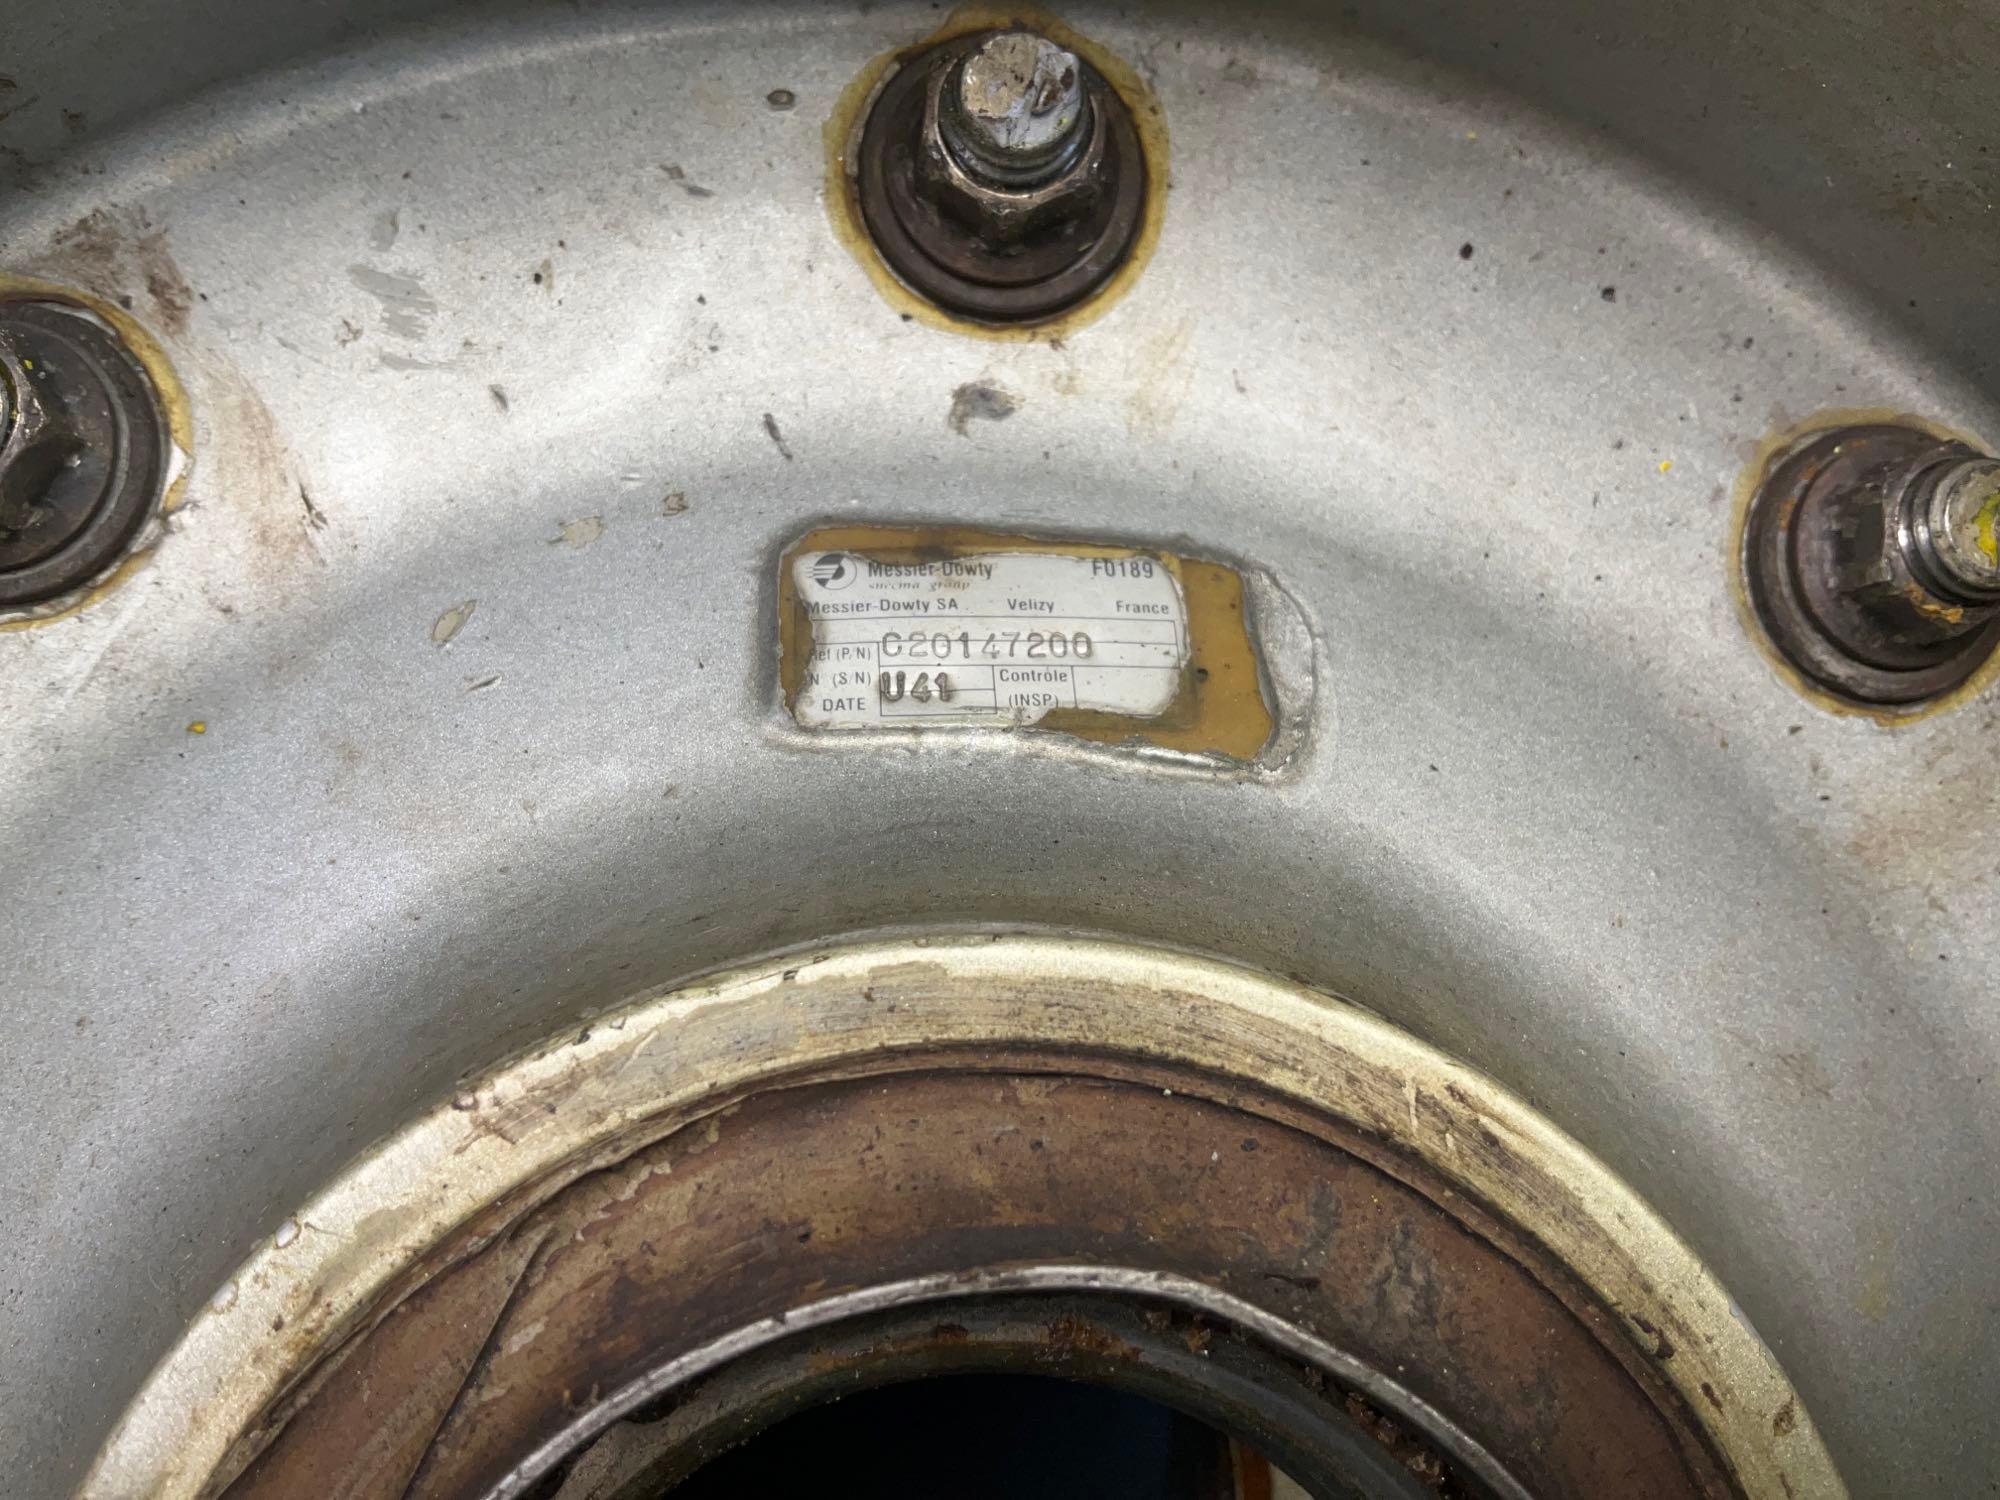 MAIN WHEEL ASSYS C20147-200 (REMOVED FOR WEAR)